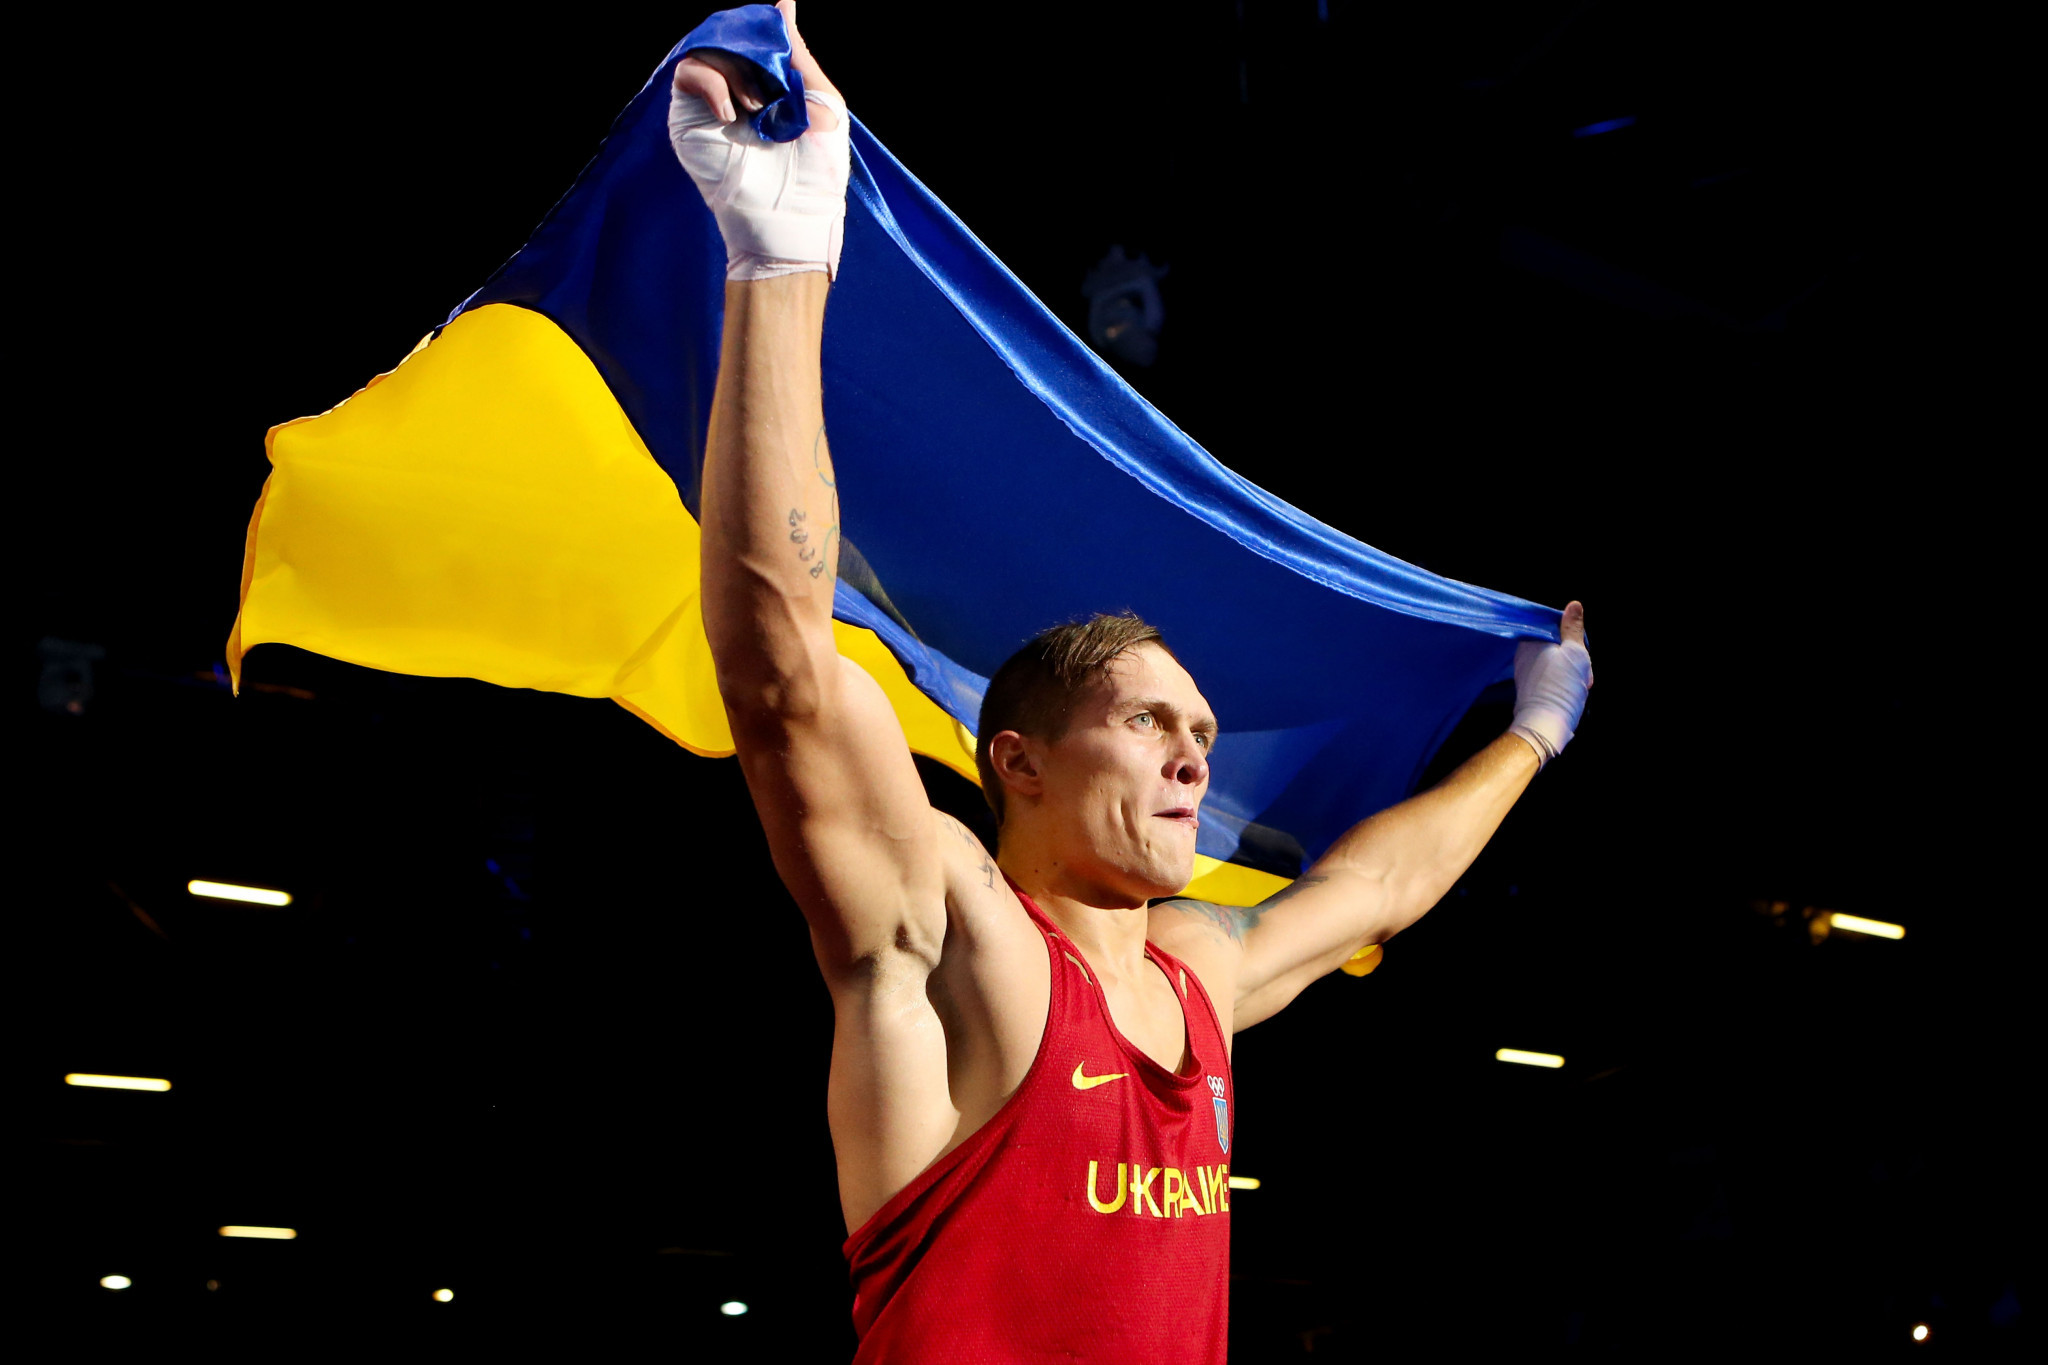 Oleksandr Usyk won a boxing gold for Ukraine at the London 2012 Olympics ©Getty Images